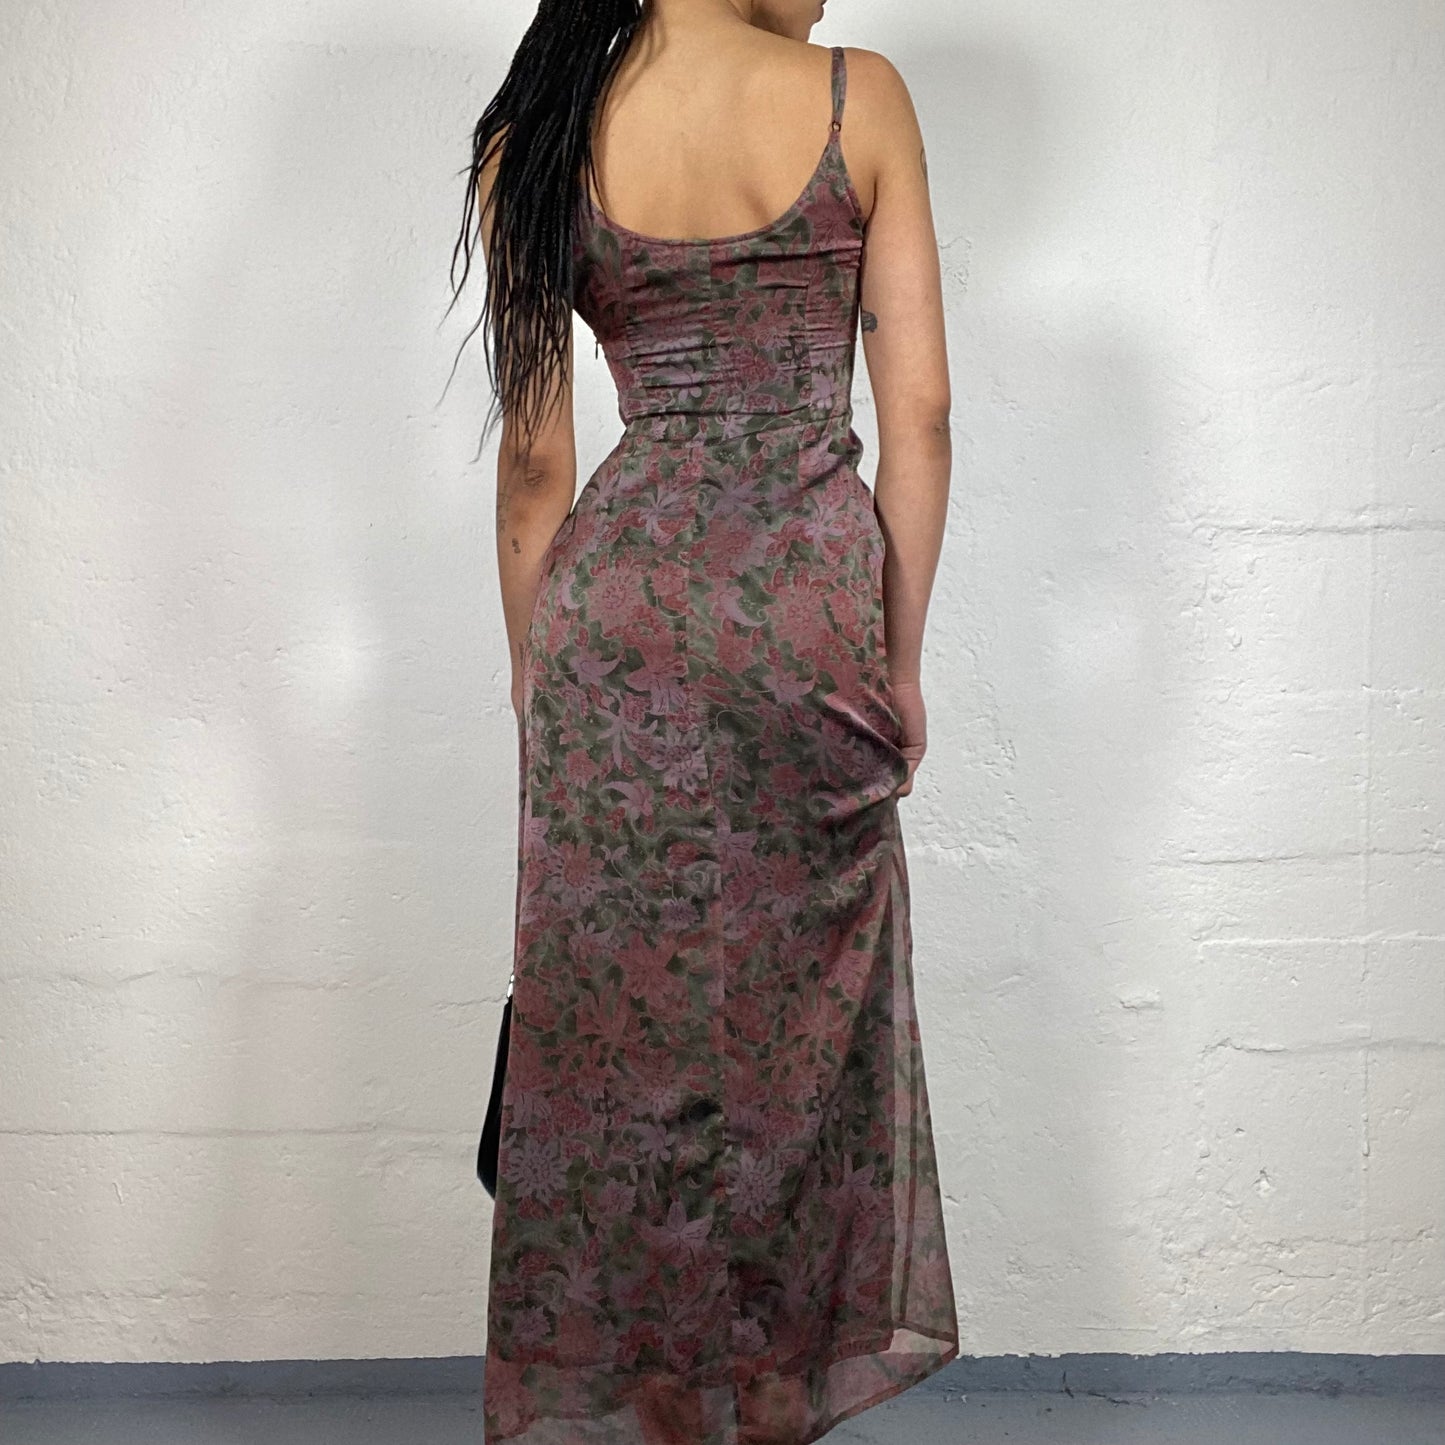 Vintage 2000's Boho Girl Dirty Pink Cami Mesh Maxi Dress with Floral Print (S)